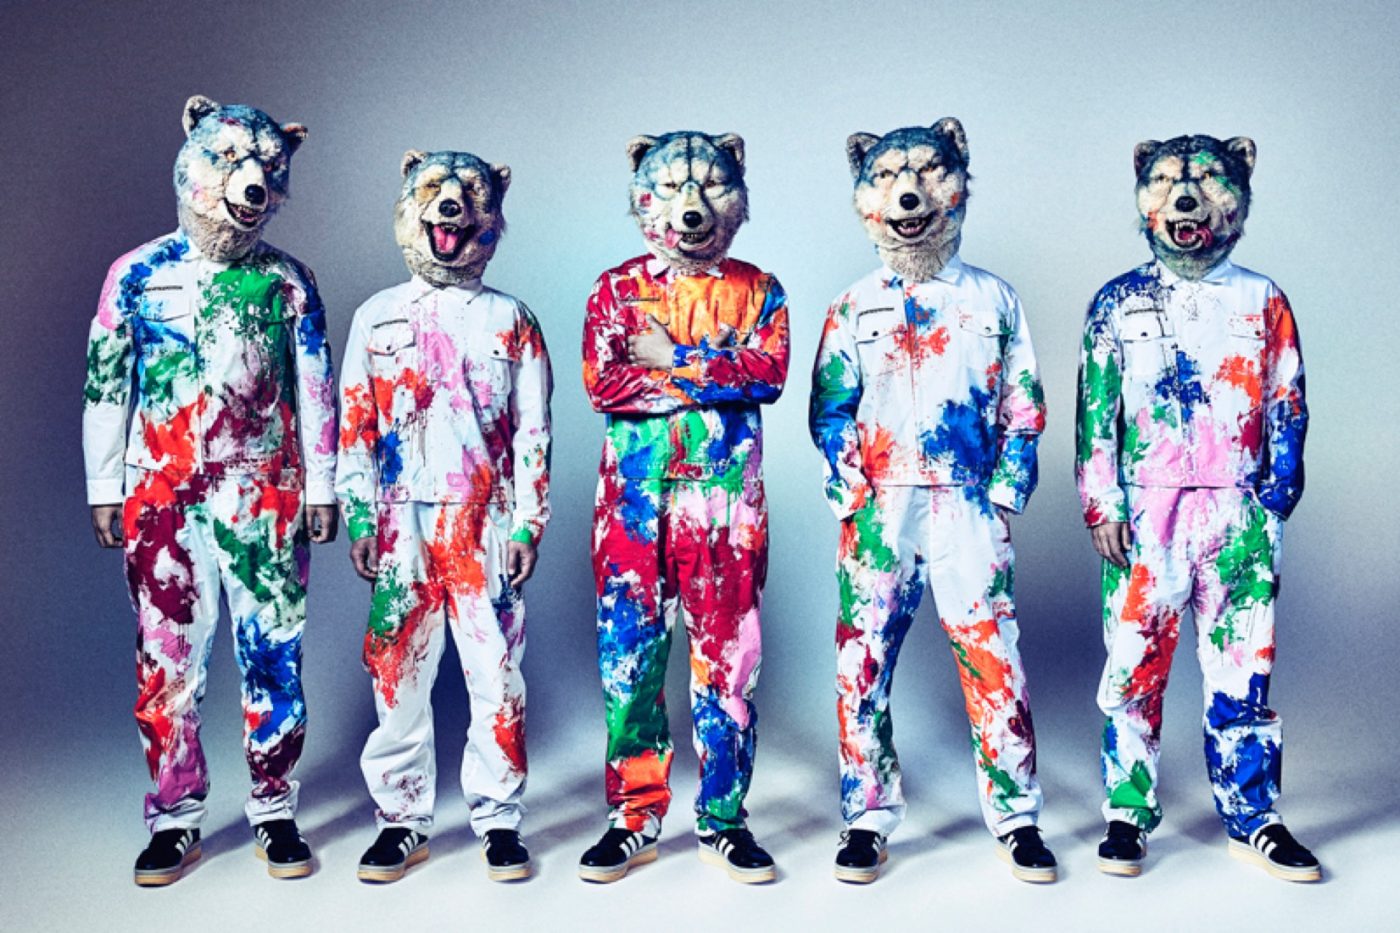 MAN WITH A MISSION、連続アルバム第2弾の発売＆全国ツアー開催決定